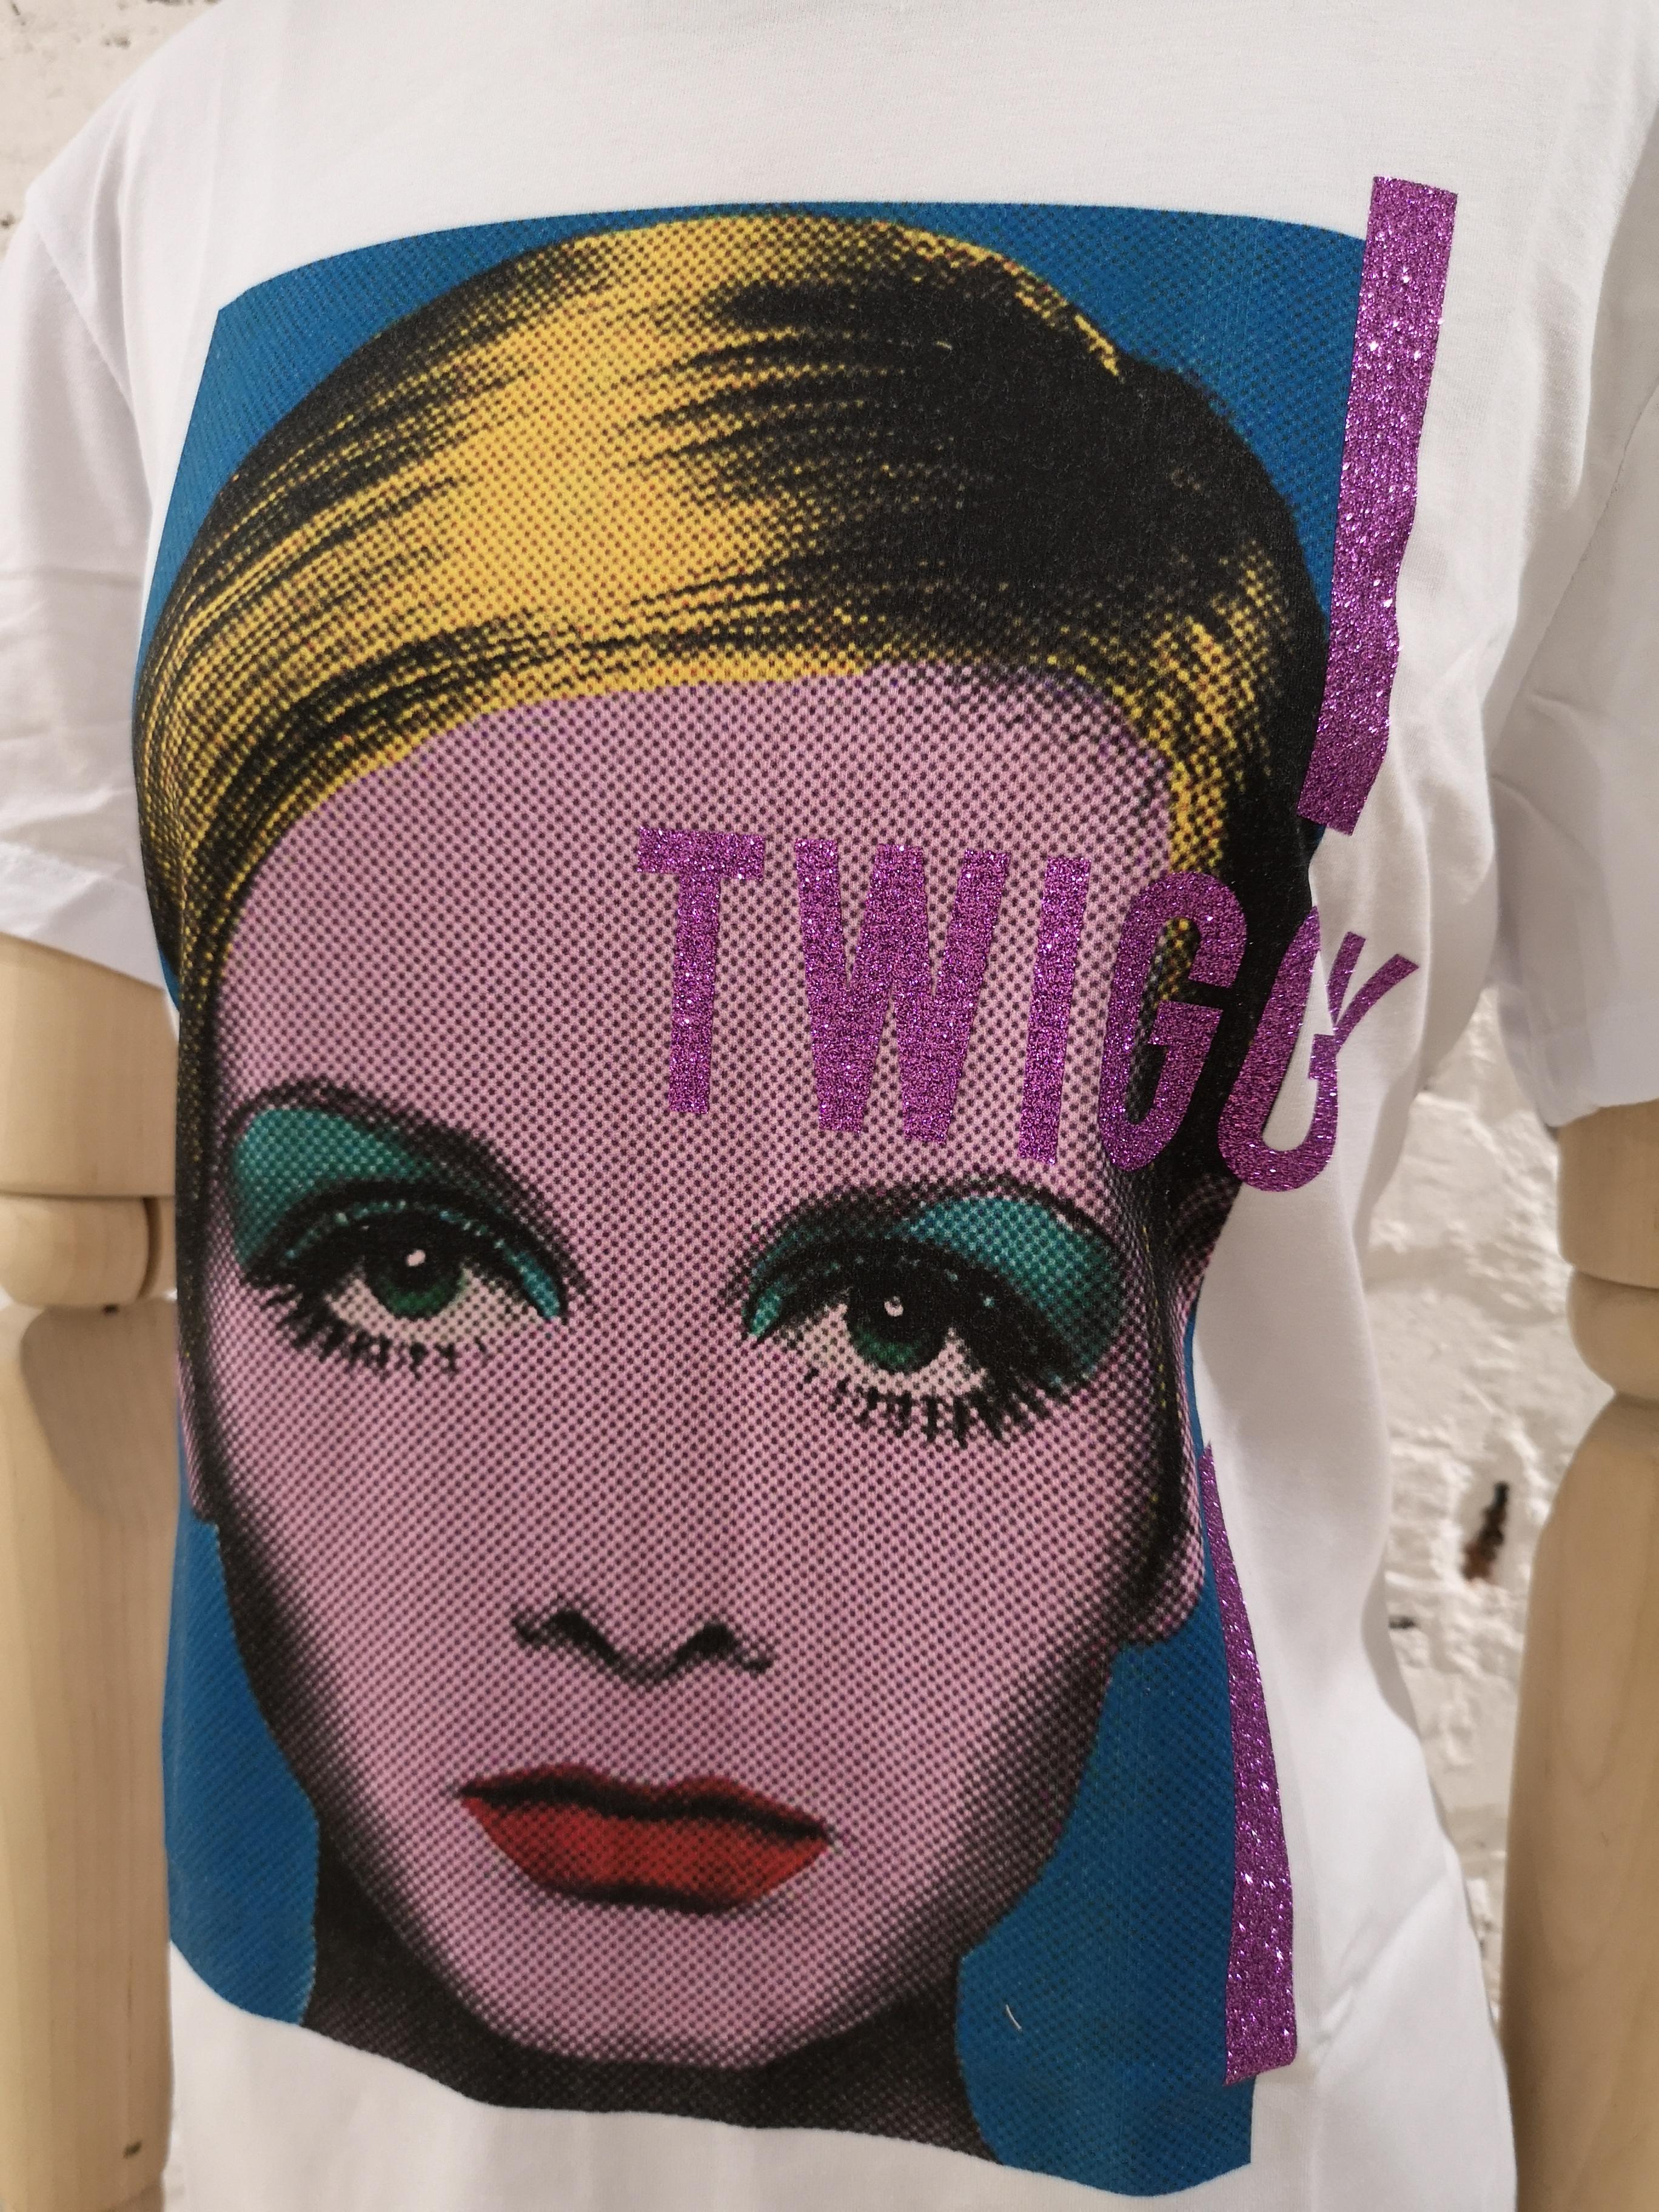 Gli Psicopatici White Twiggy cotton shirt
White t-shirt totally made in italy, composition is cotton
Twiggy image on the front
available in different sizes
